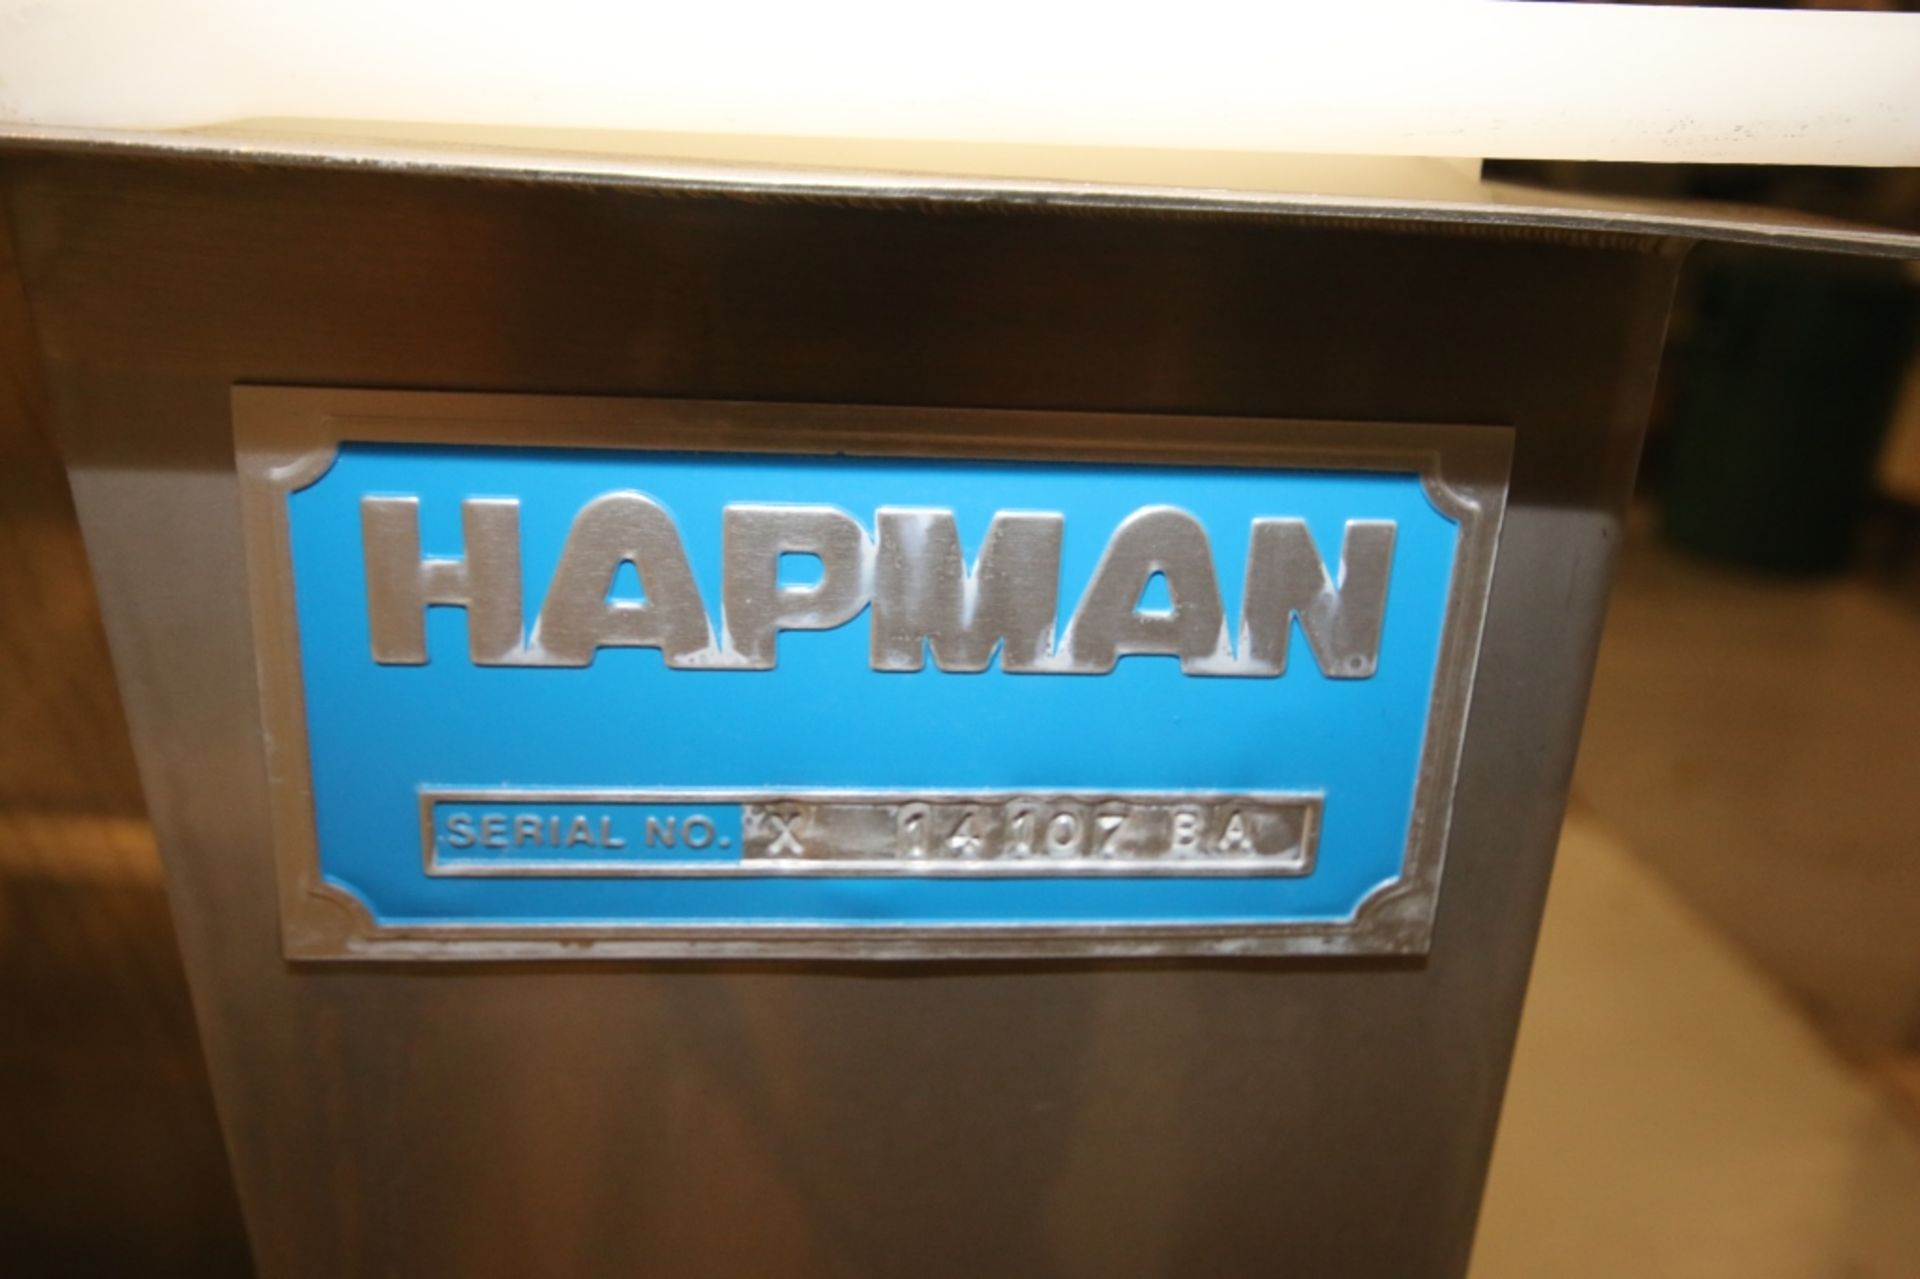 Hapman Powder Auger Conveyor System, Includes38" W x 38" L x 36" H S/S Hopper SN X 14107 BA, with - Image 7 of 10